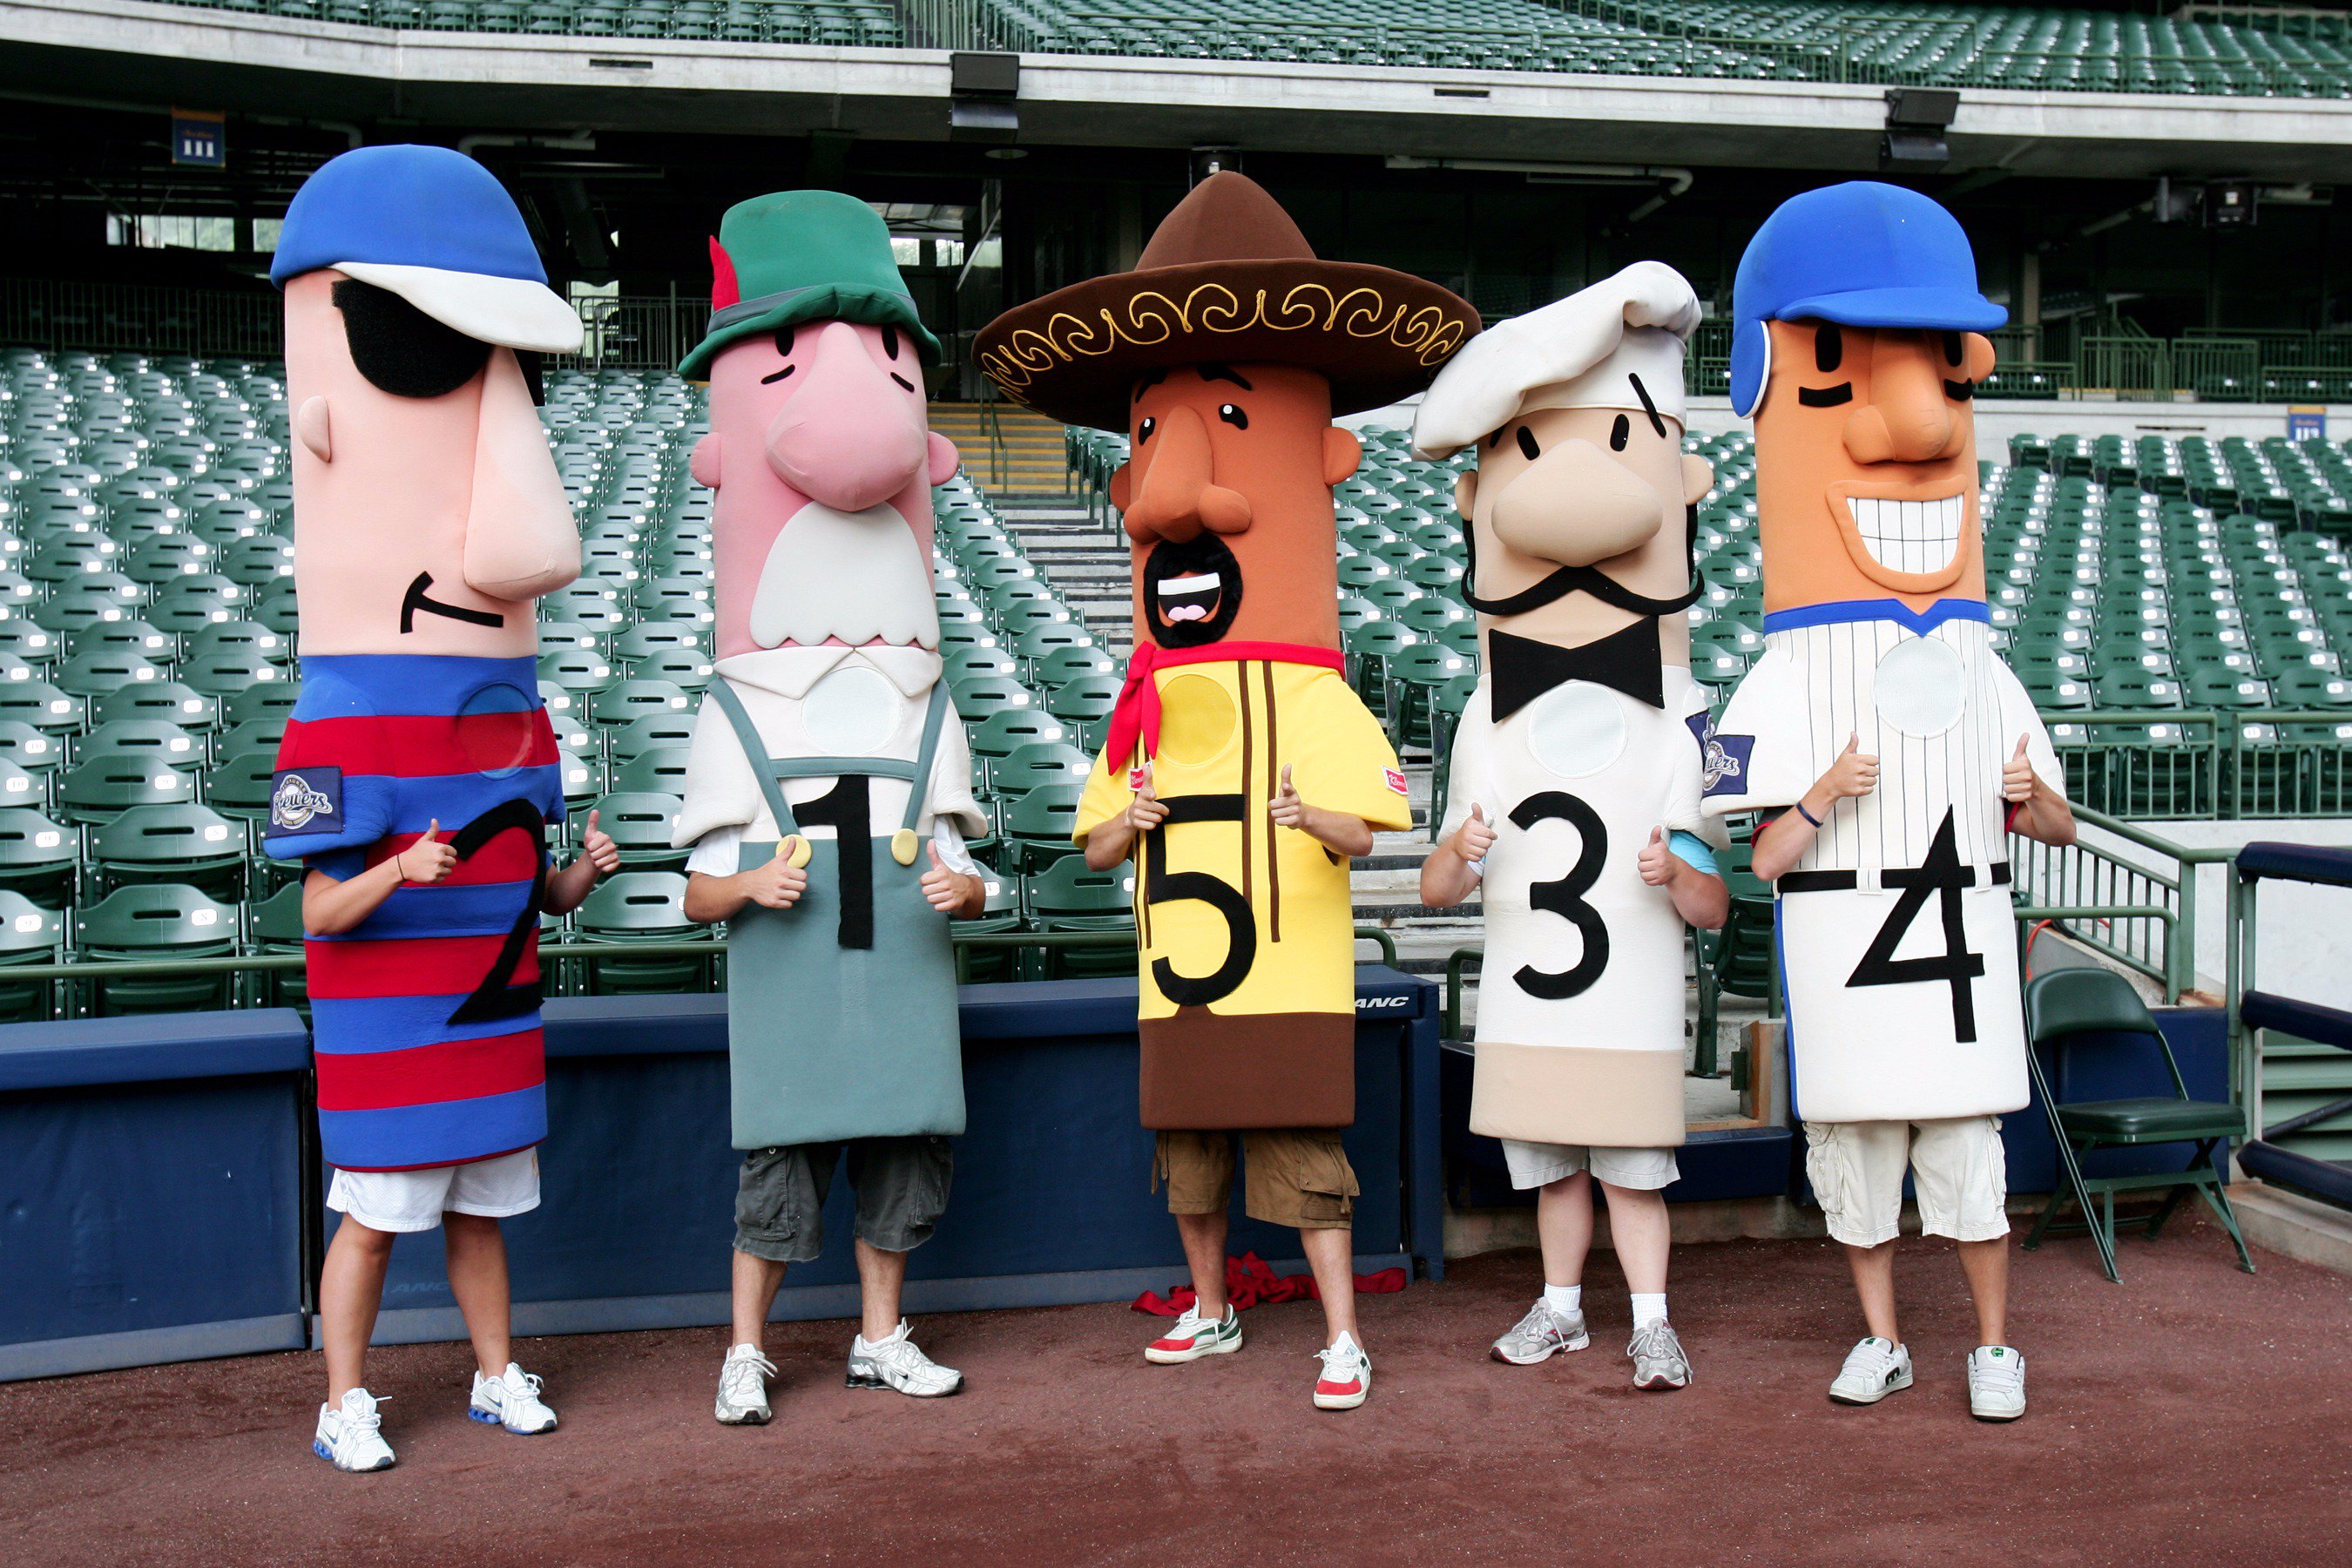 Event Information - Brewers 5K Famous Racing Sausages